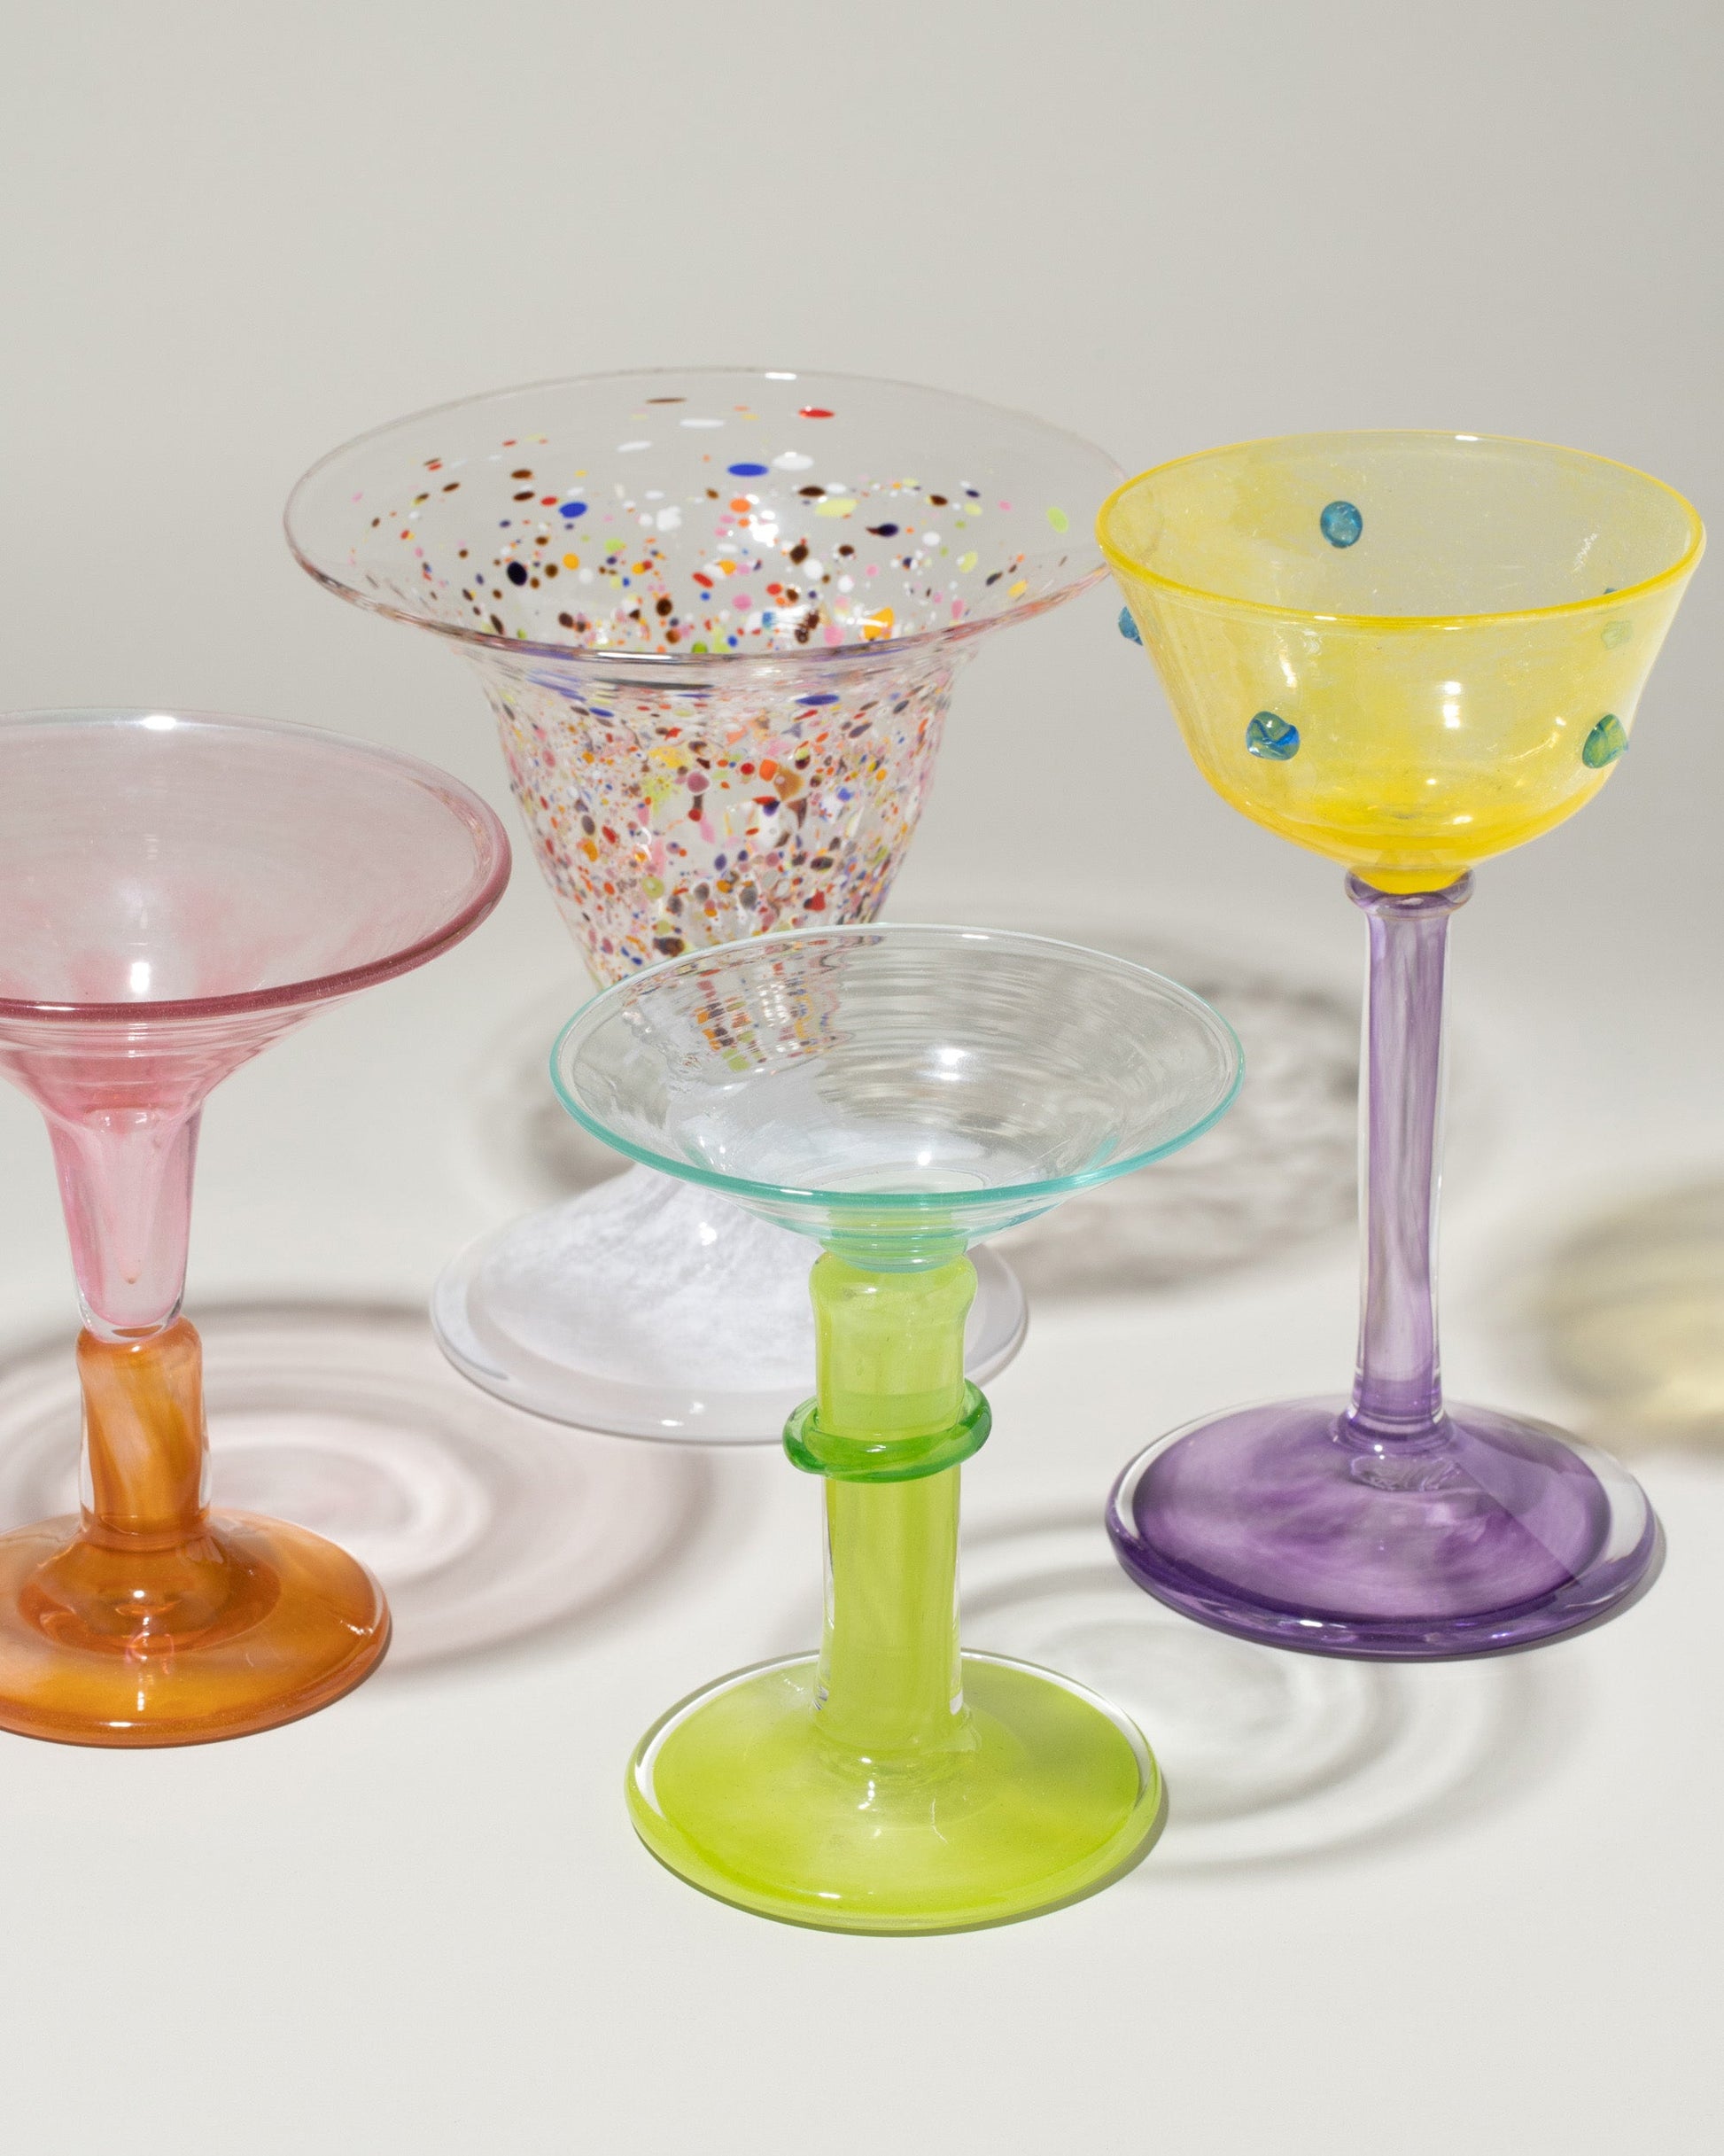  The Confetti Vessels on light color background.